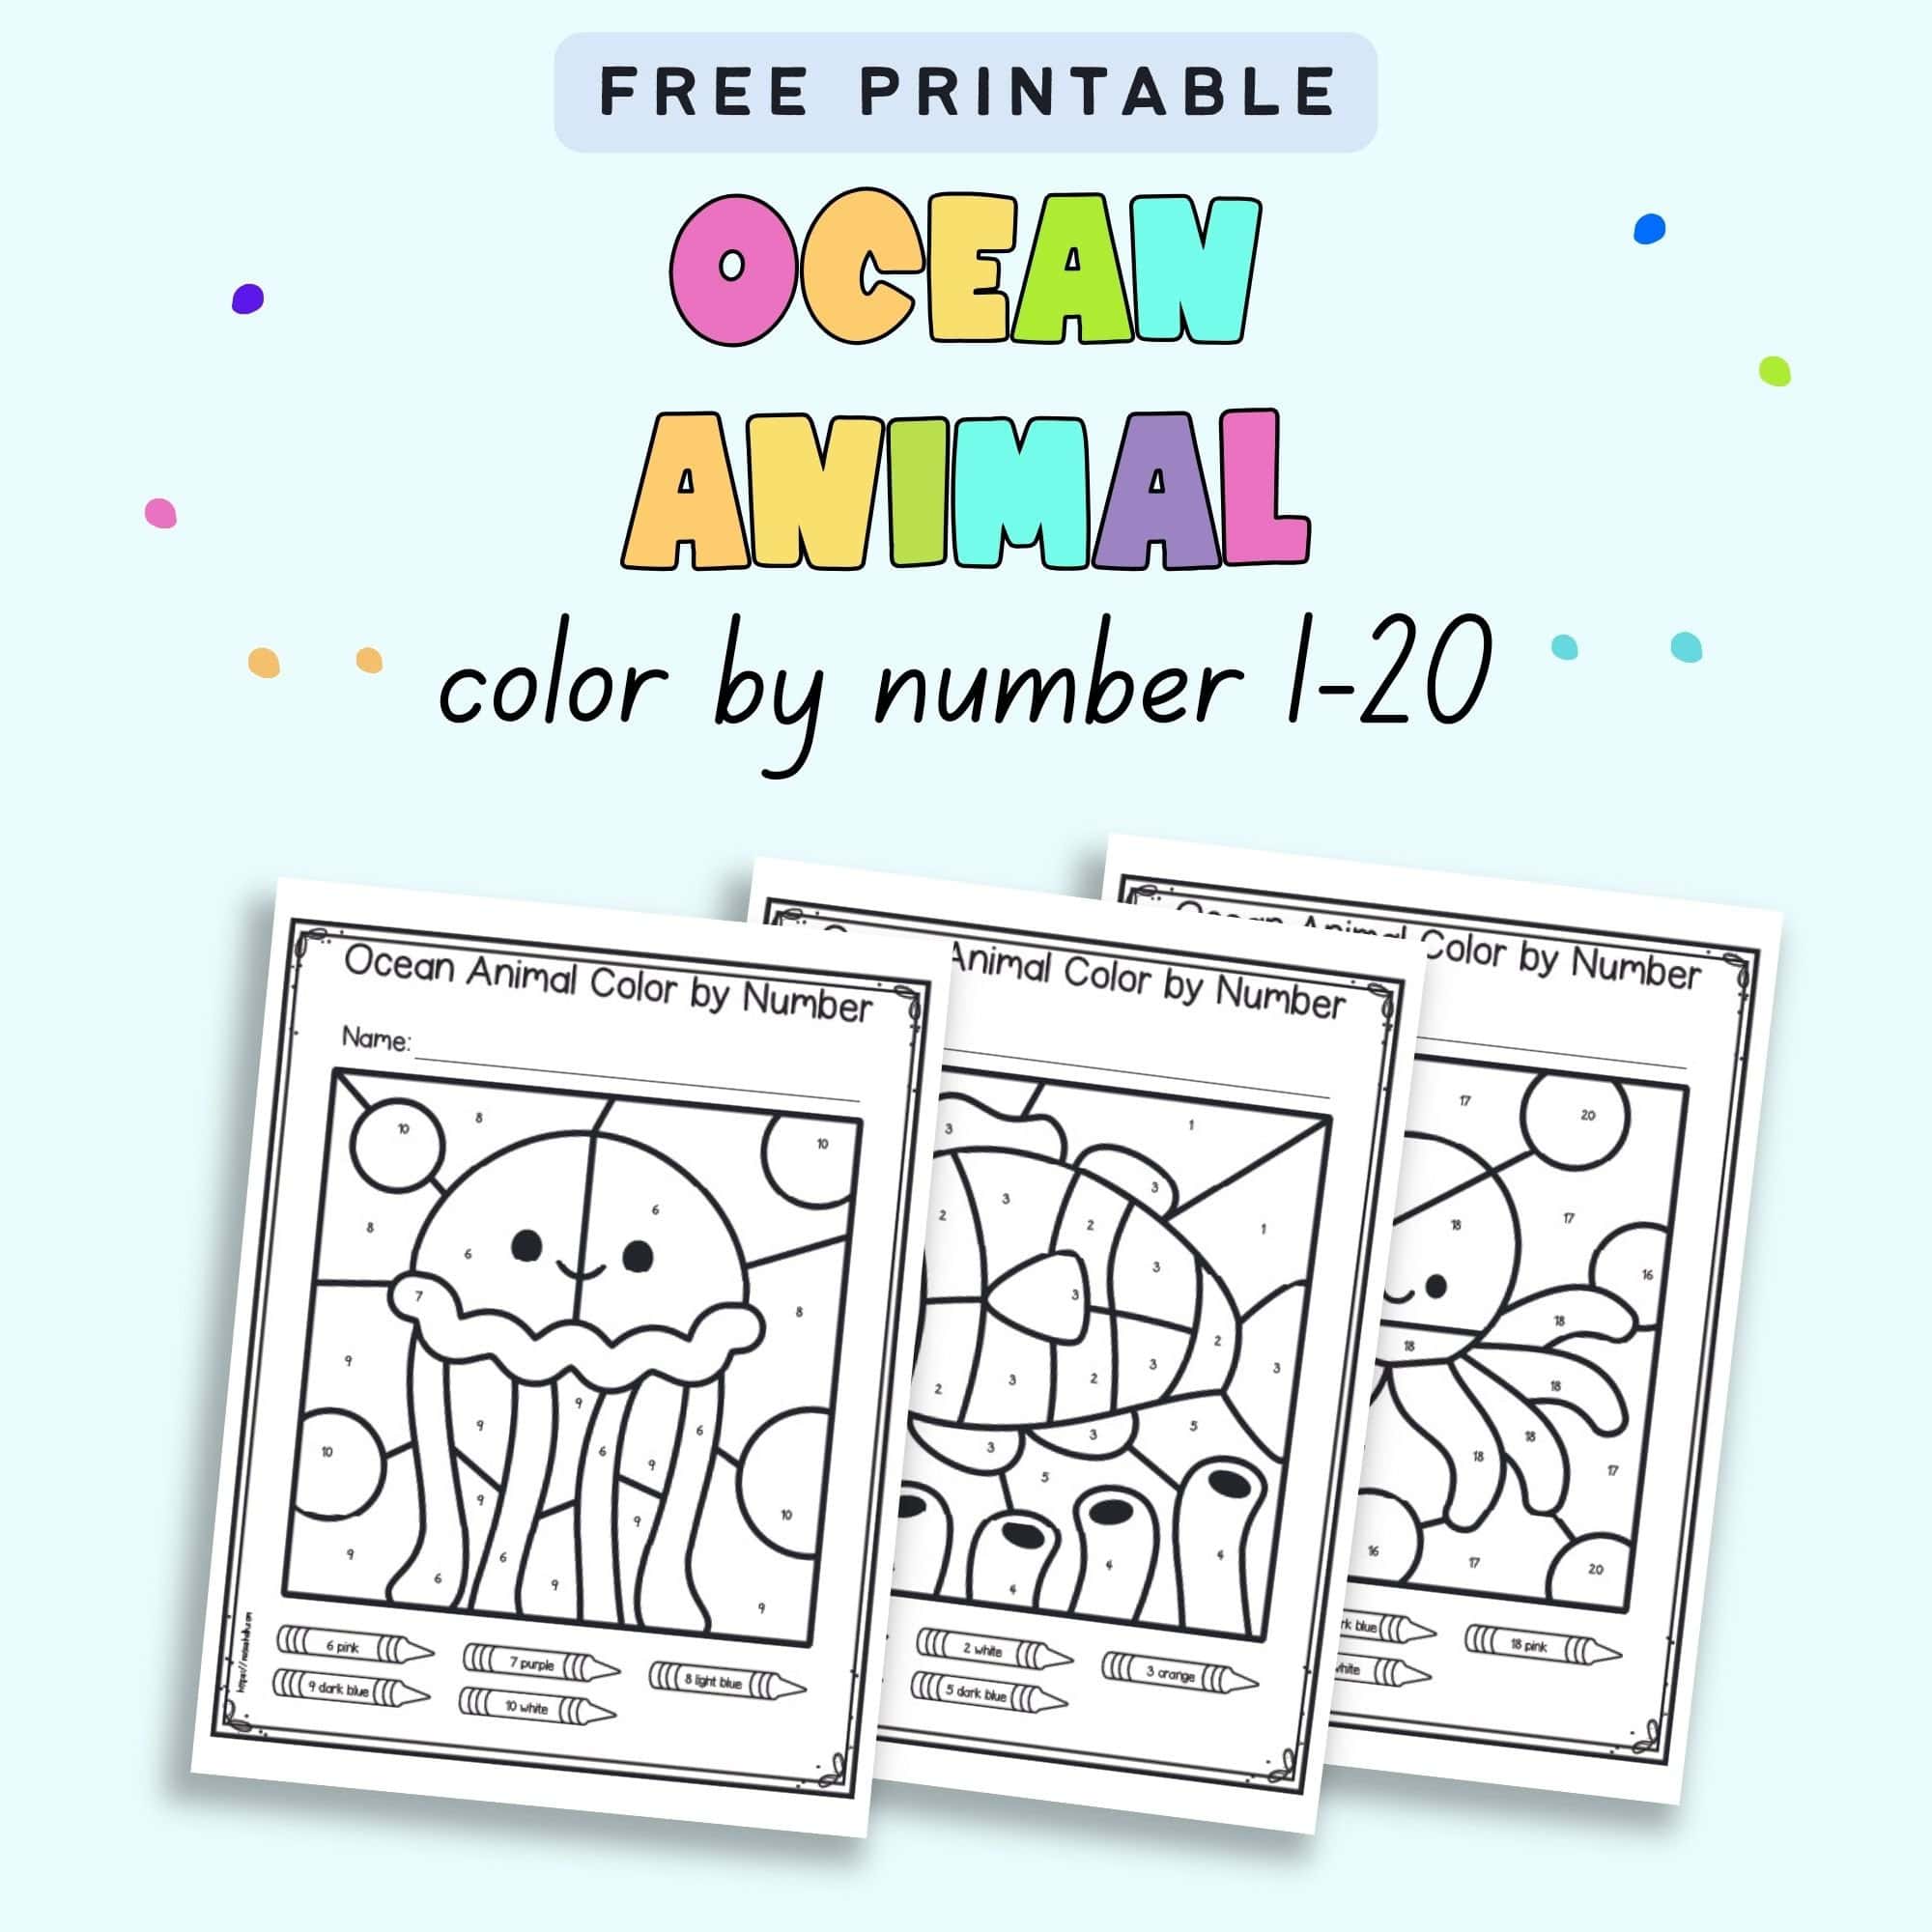 Text "free printable ocean animal color by number 1-20" with a preview of three color by number pages